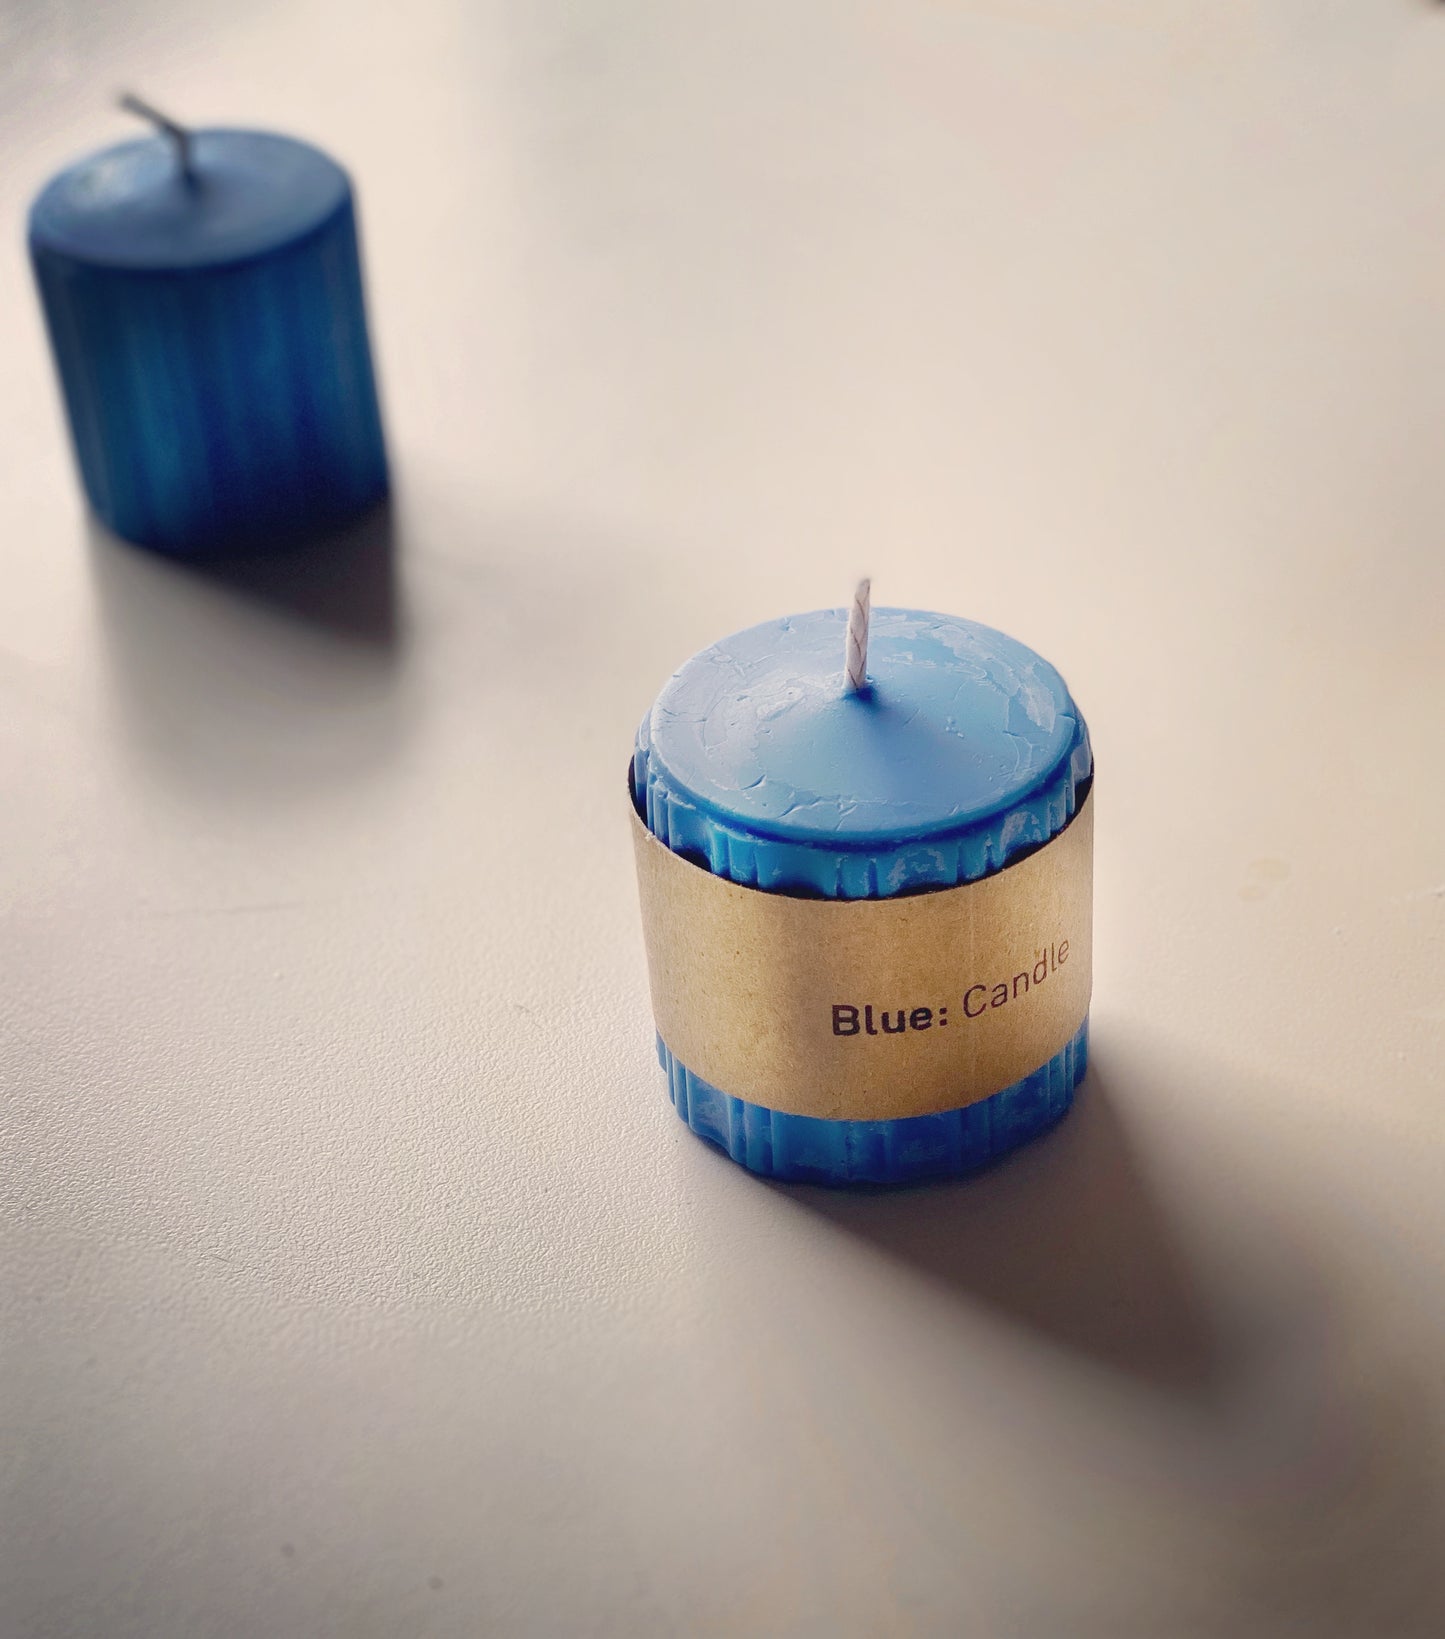 Candles Designed by Jens Harald Quistgaard for Dansk Design in the 1960s